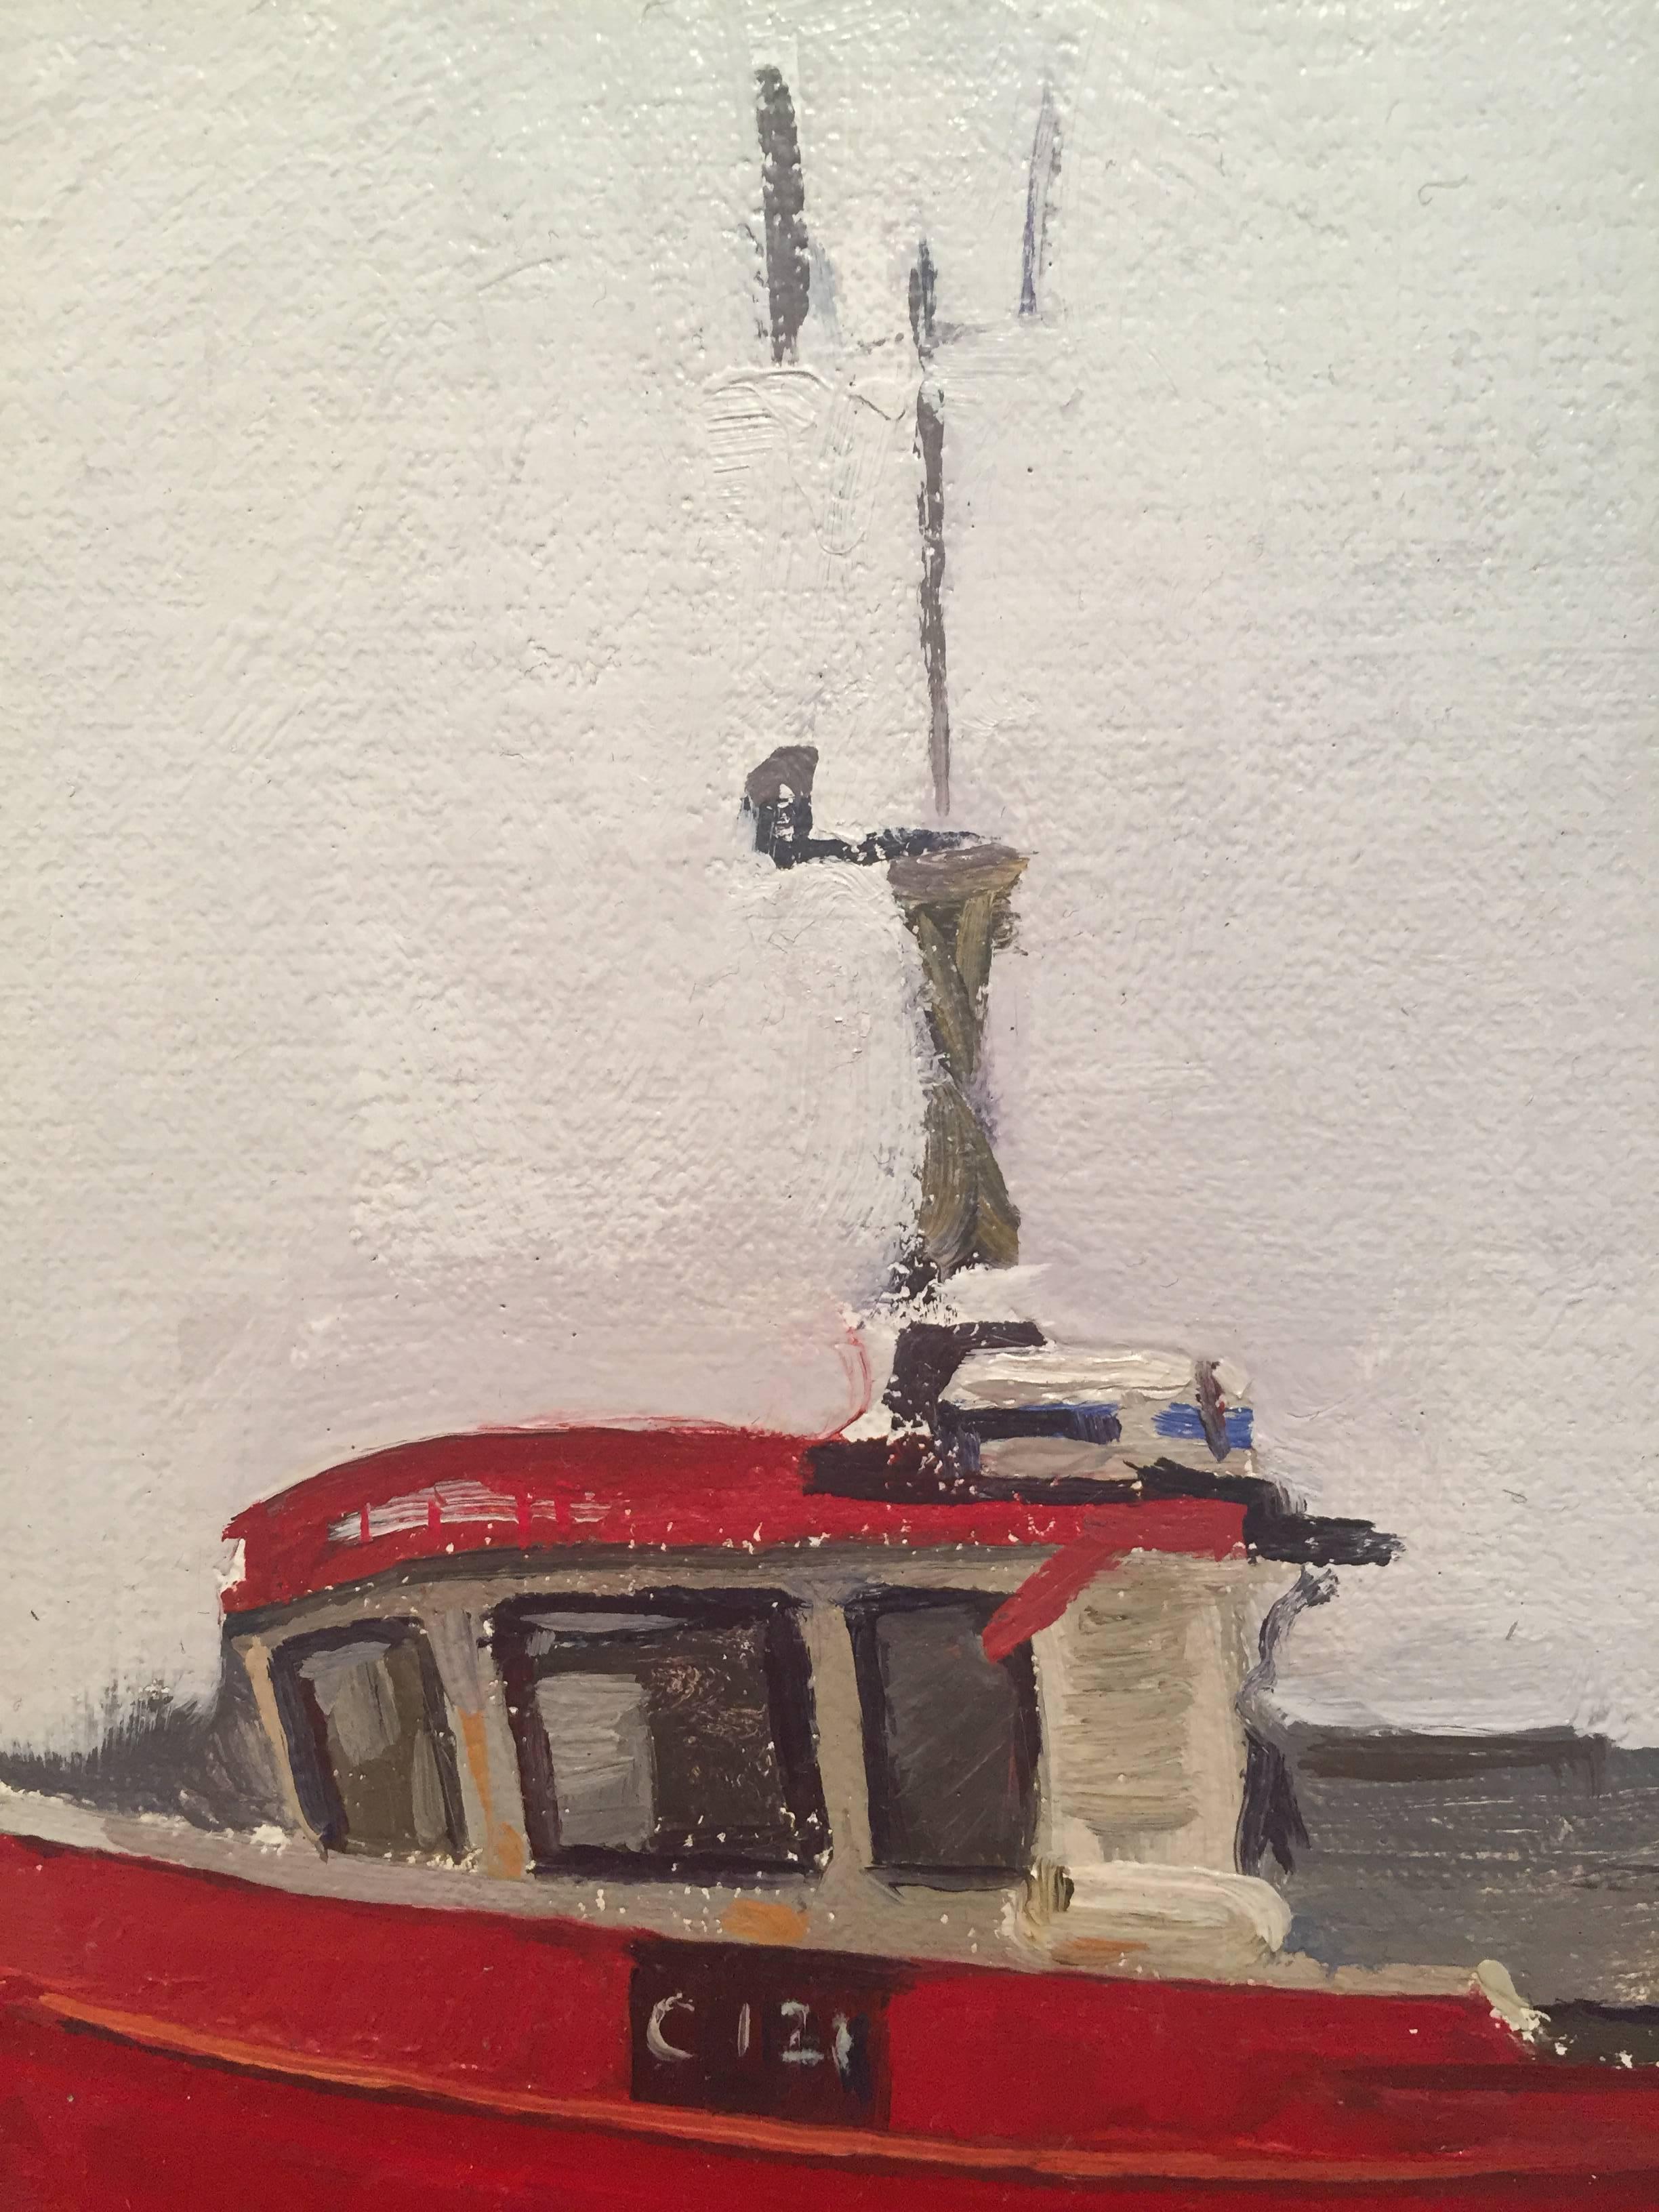 Painted en plein air in Wexford, Ireland, a red boat rests out of  water in a parking lot at Kilmore Quay, a fishing port and leisure marina. An Irish flag flies proud on the right; dissecting the thick, cloudy, grey sky.

Marc Dalessio was born in